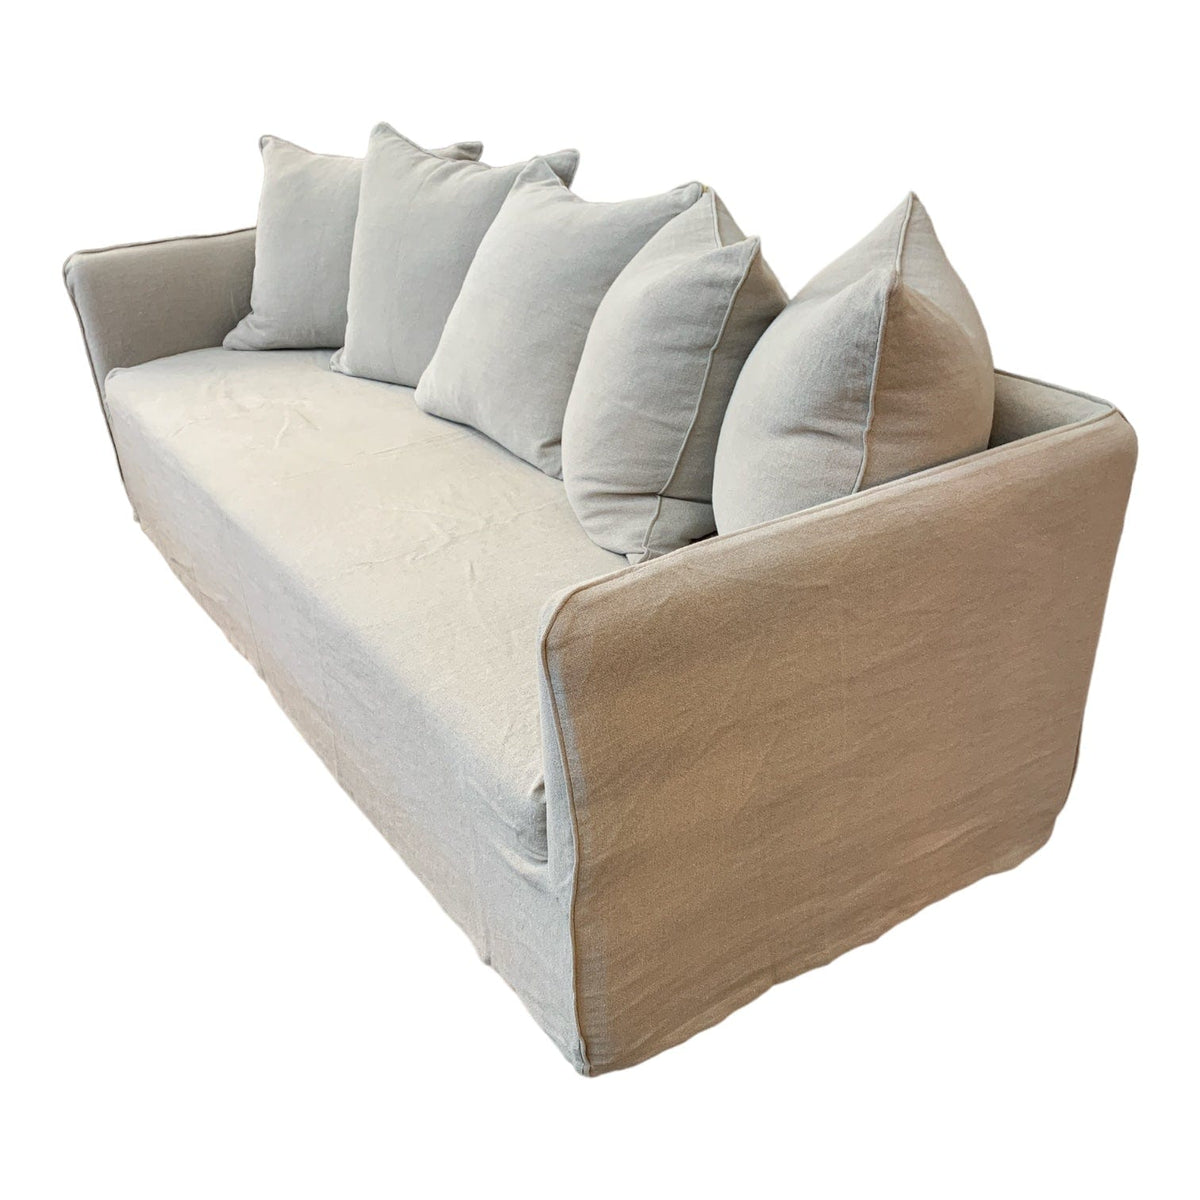 Ted 3 Seater Sofa